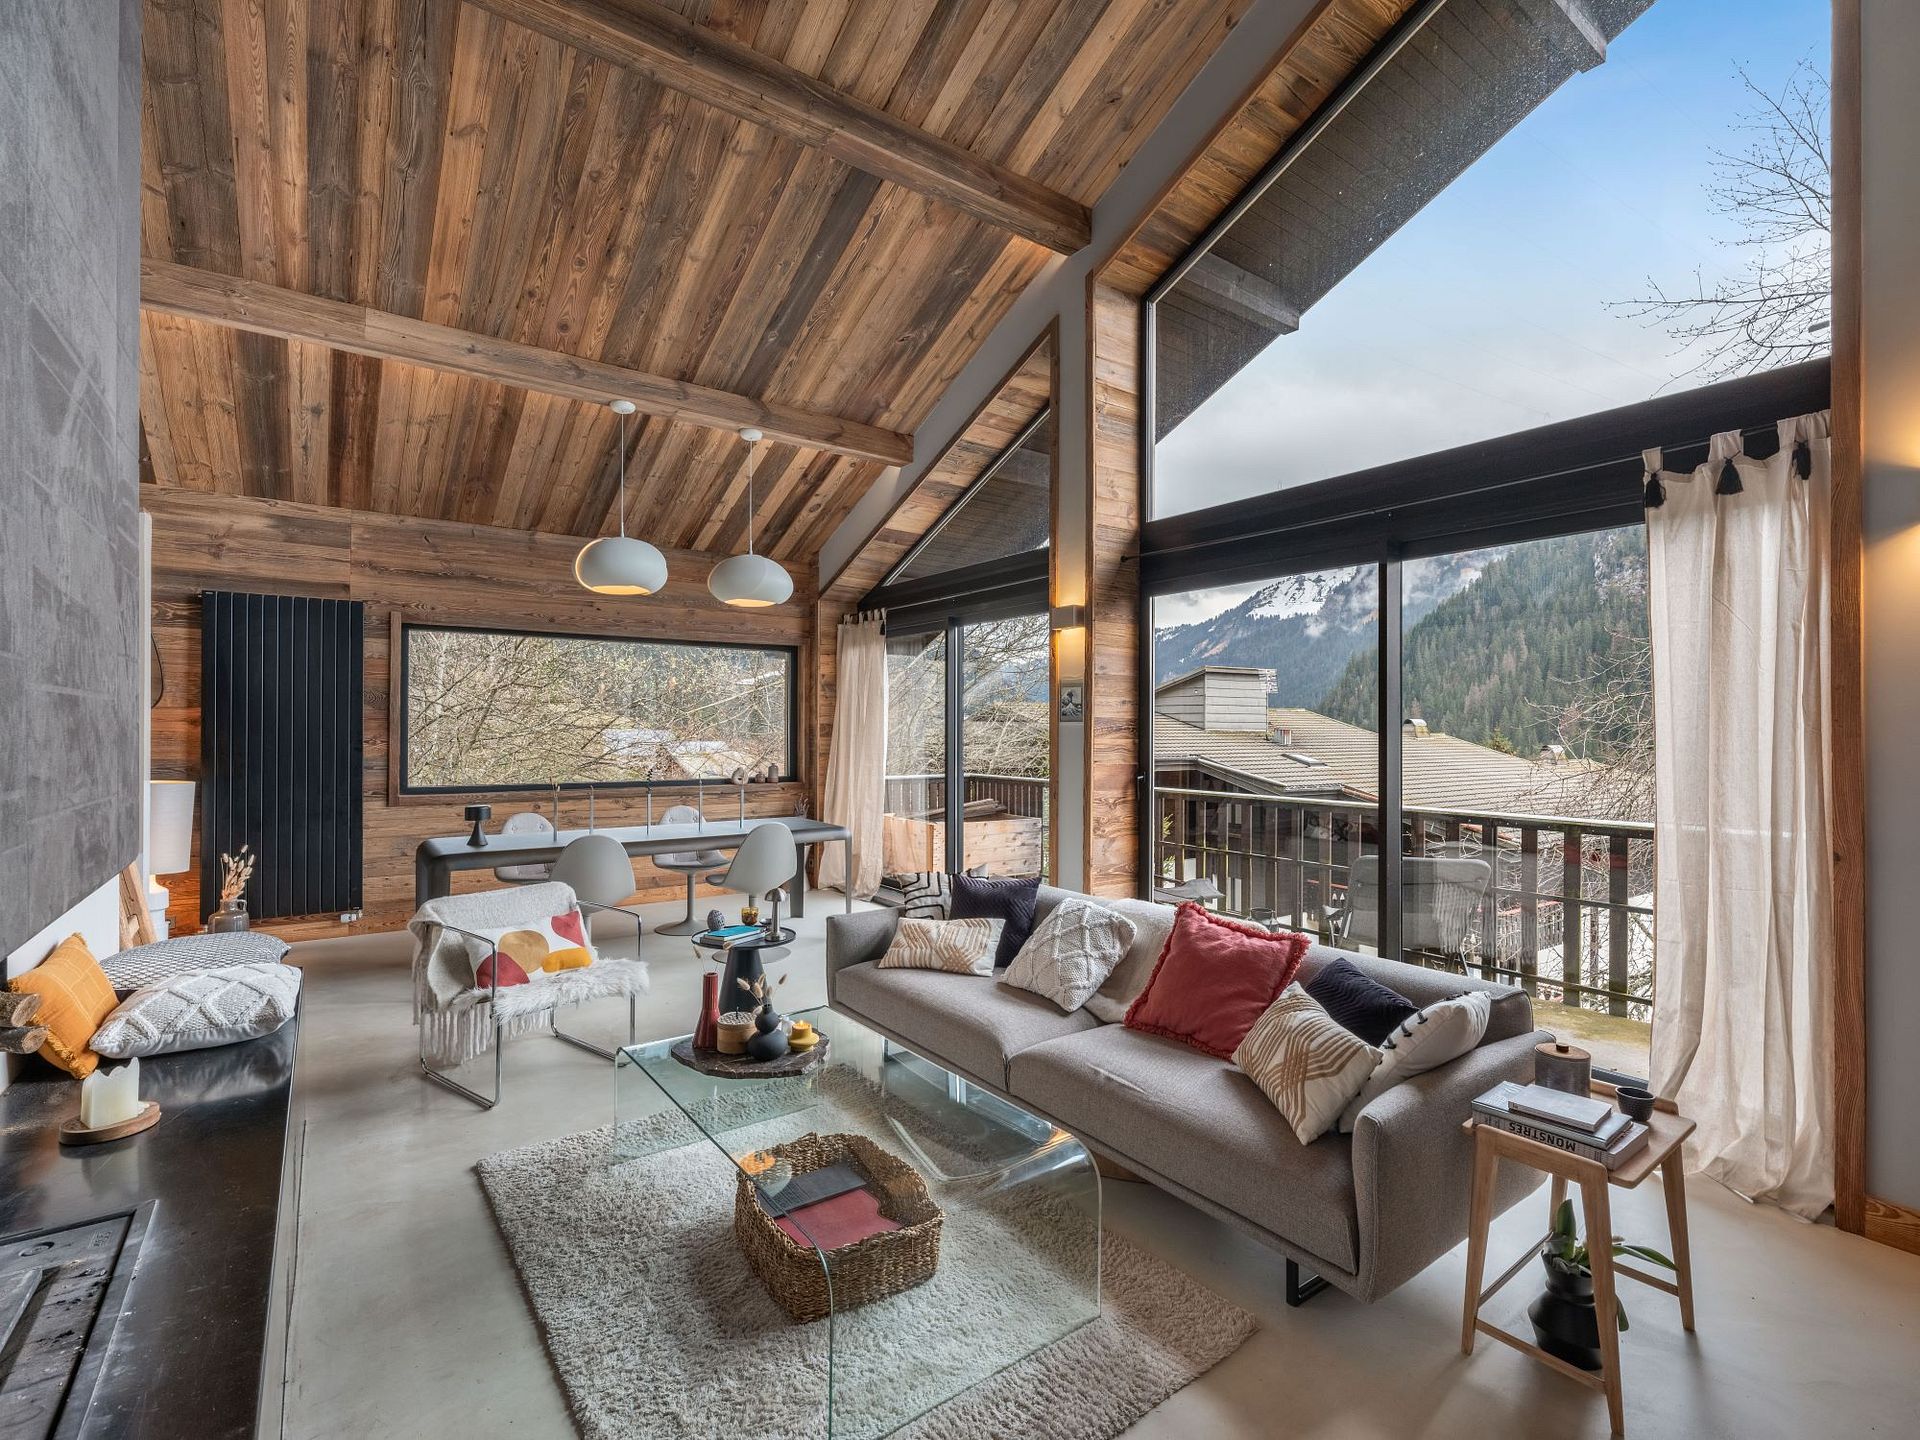 5 bed Apartment For Sale in Portes du Soleil, French Alps